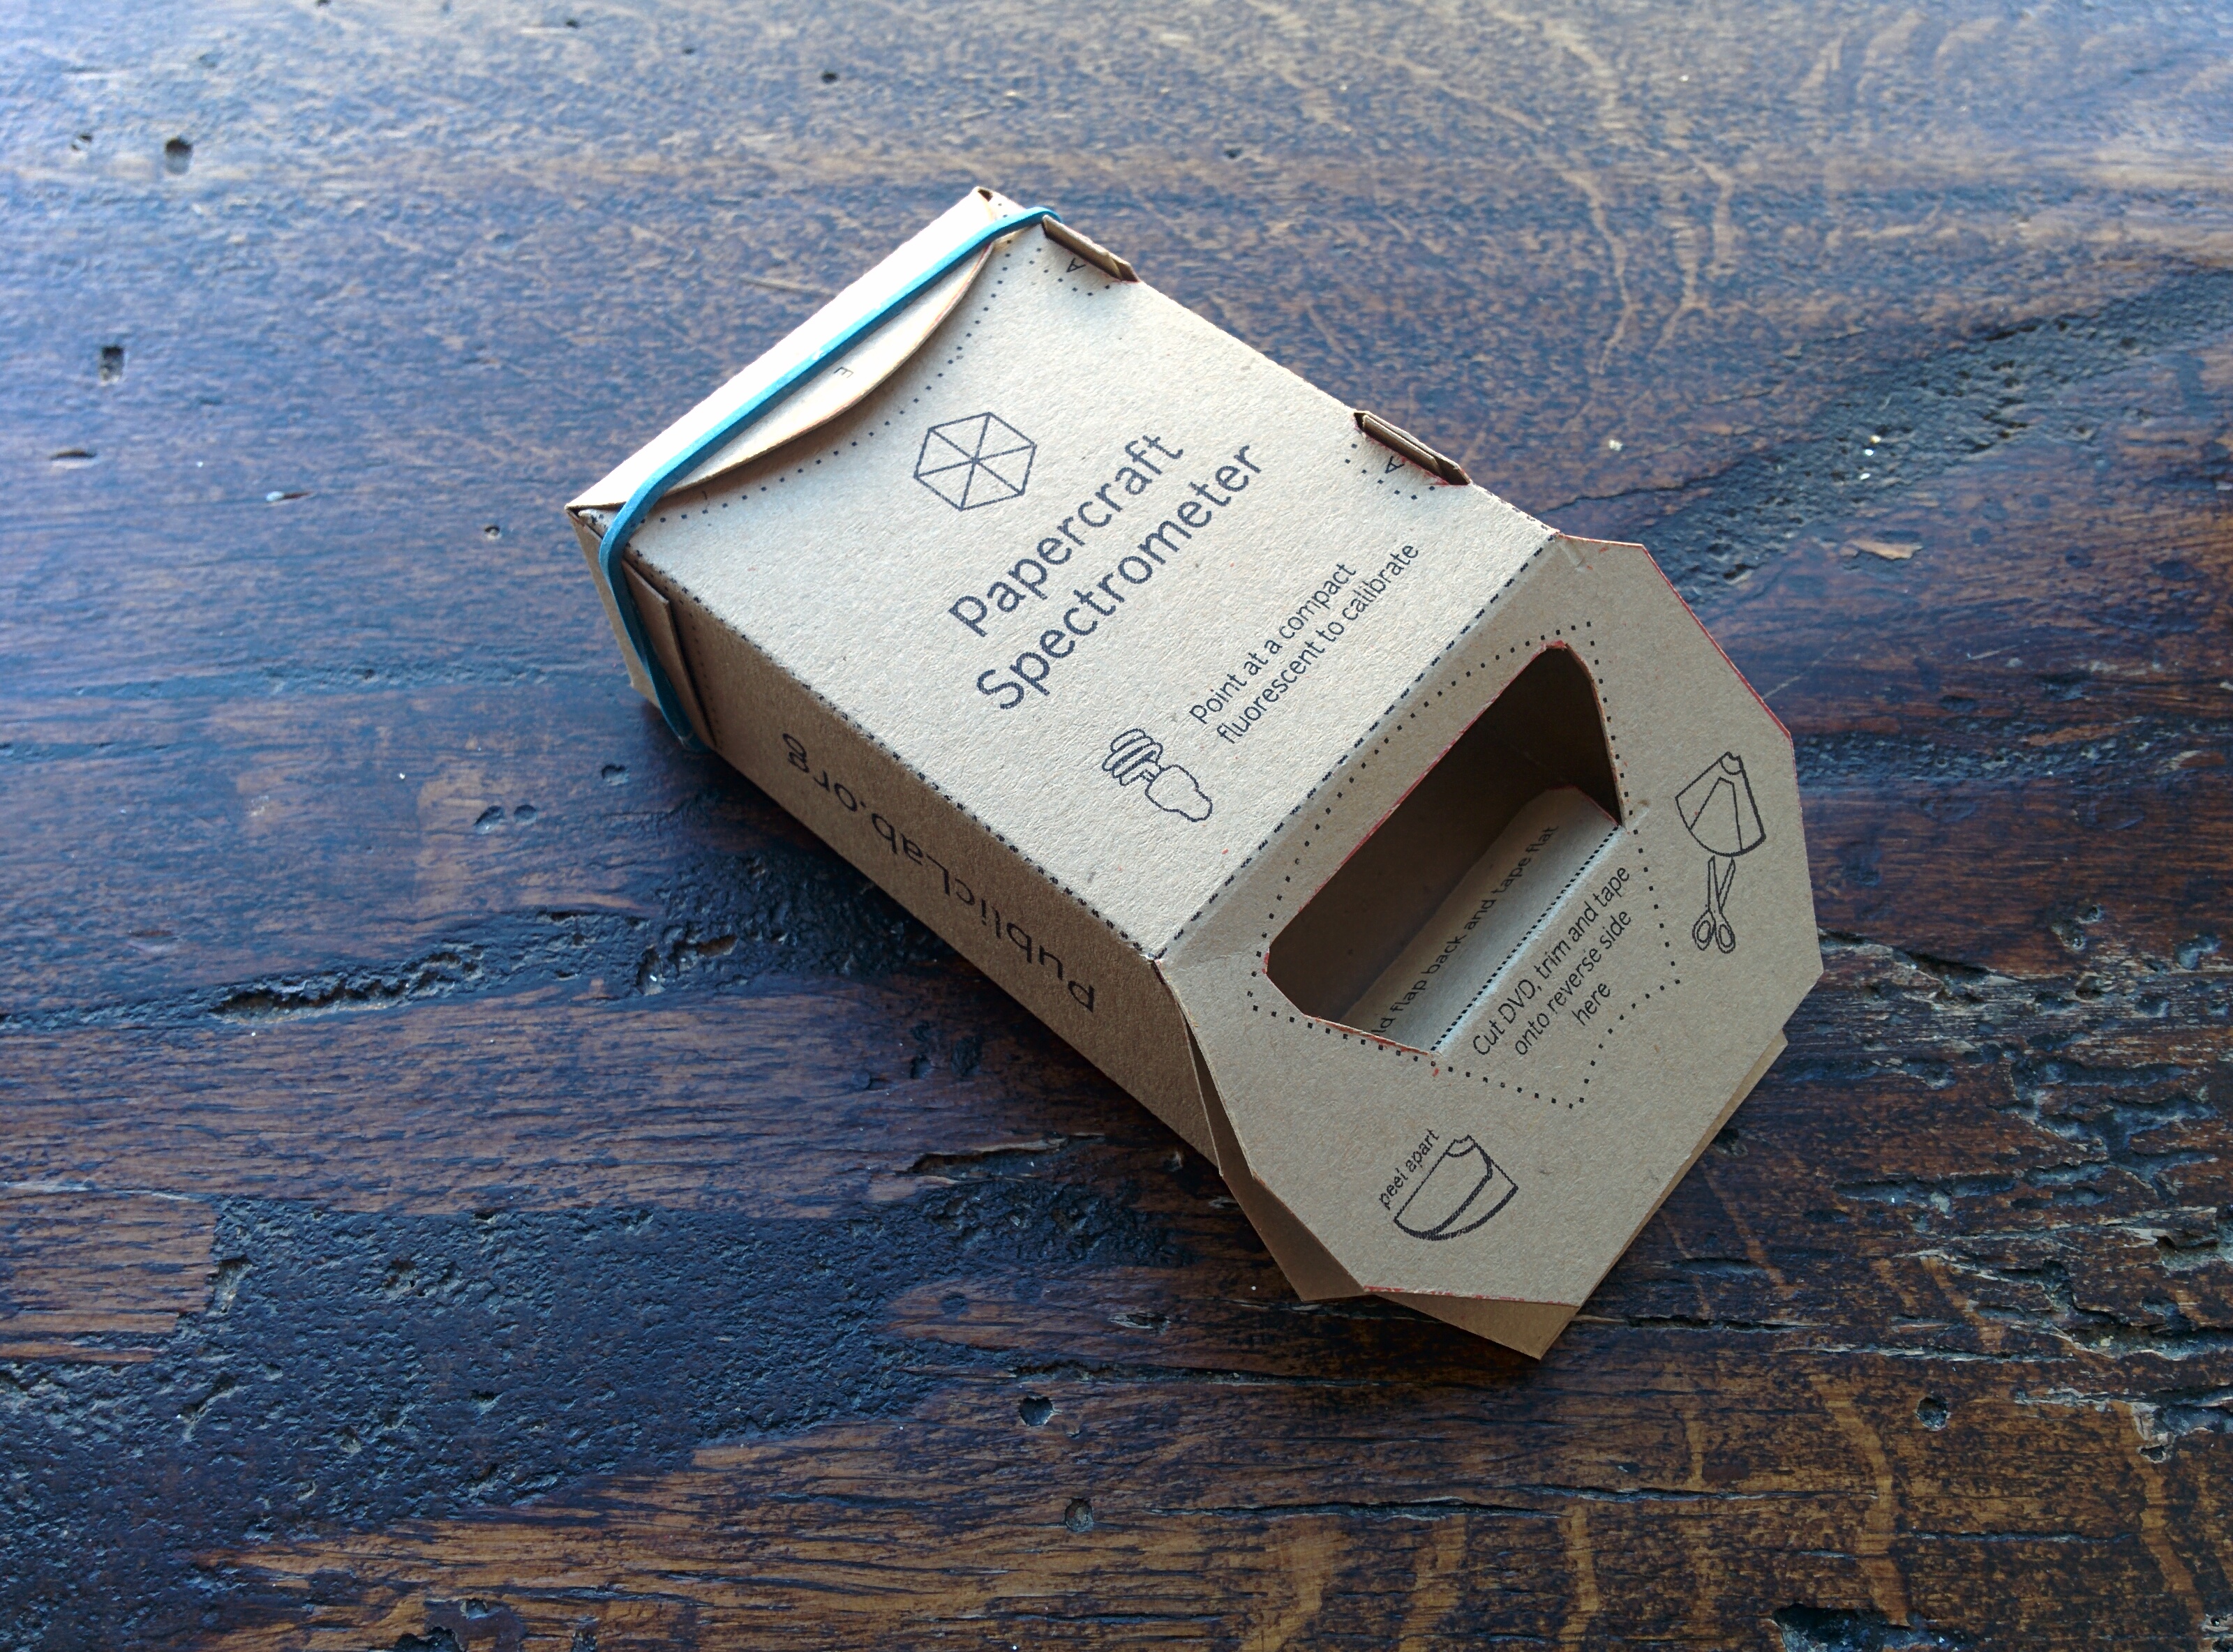 the papercraft spectrometer assembled, on a wooden table